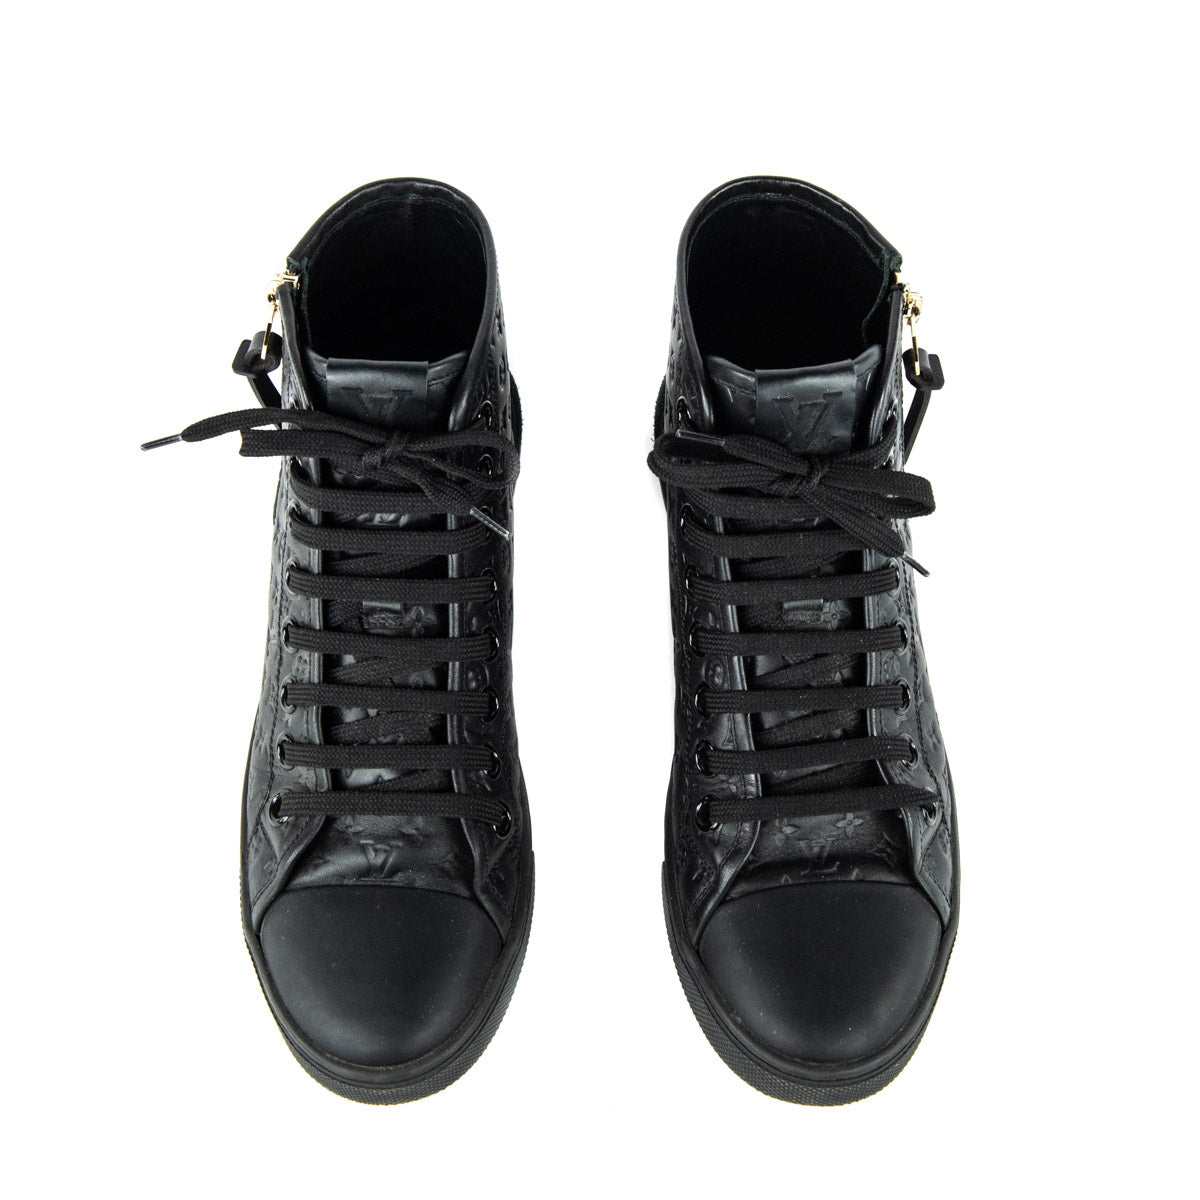 Louis Vuitton Leather Higbh-Top Sneakers - Black Sneakers, Shoes